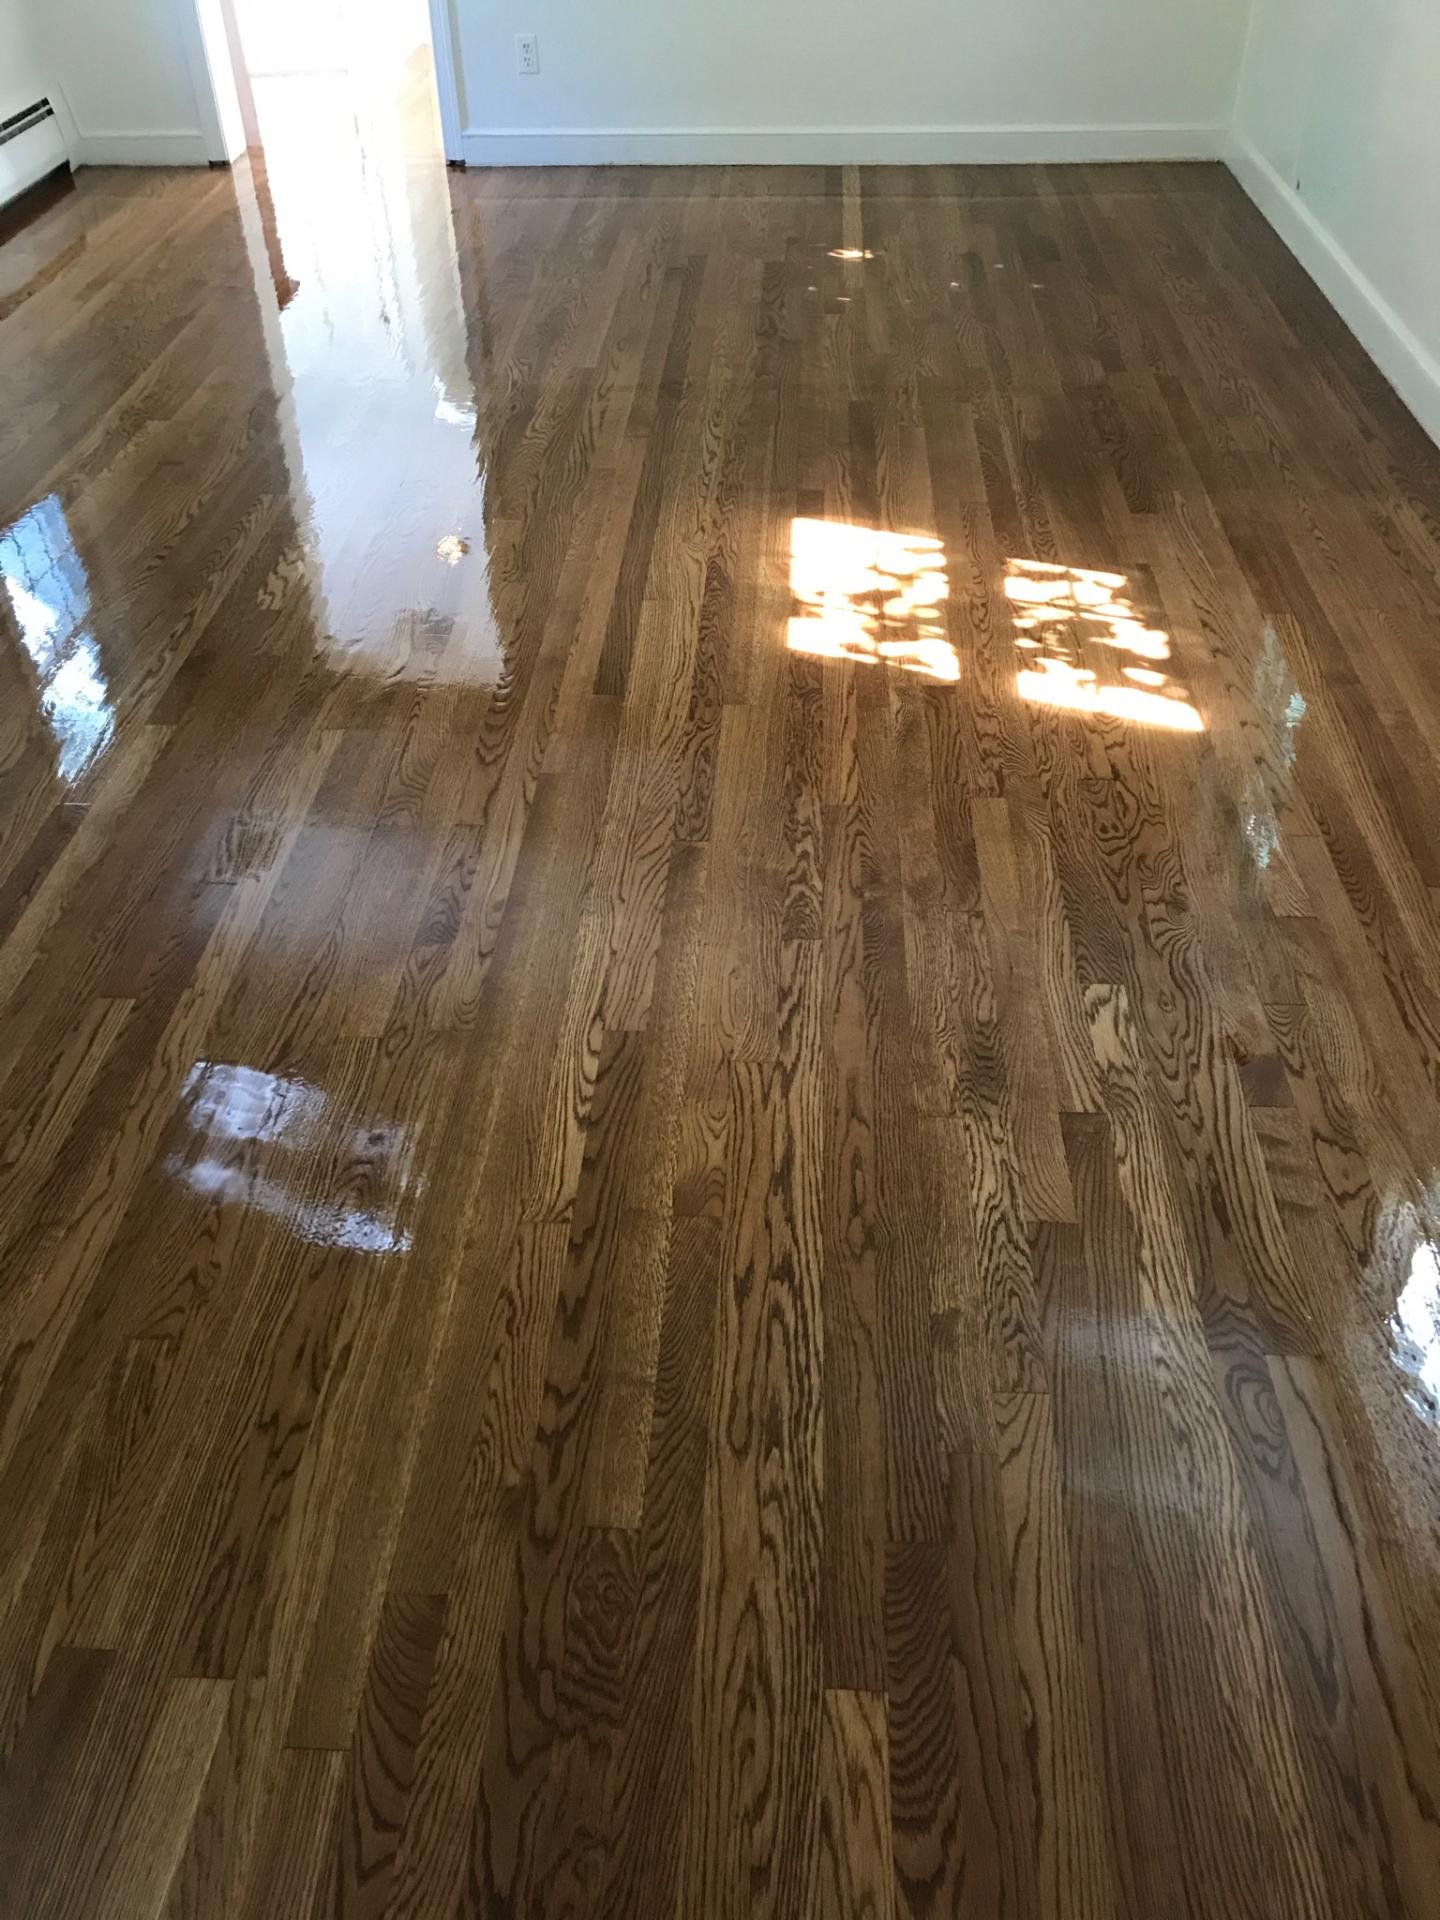 White Oak Hardwood Floors With Golden Brown Stain Central Mass